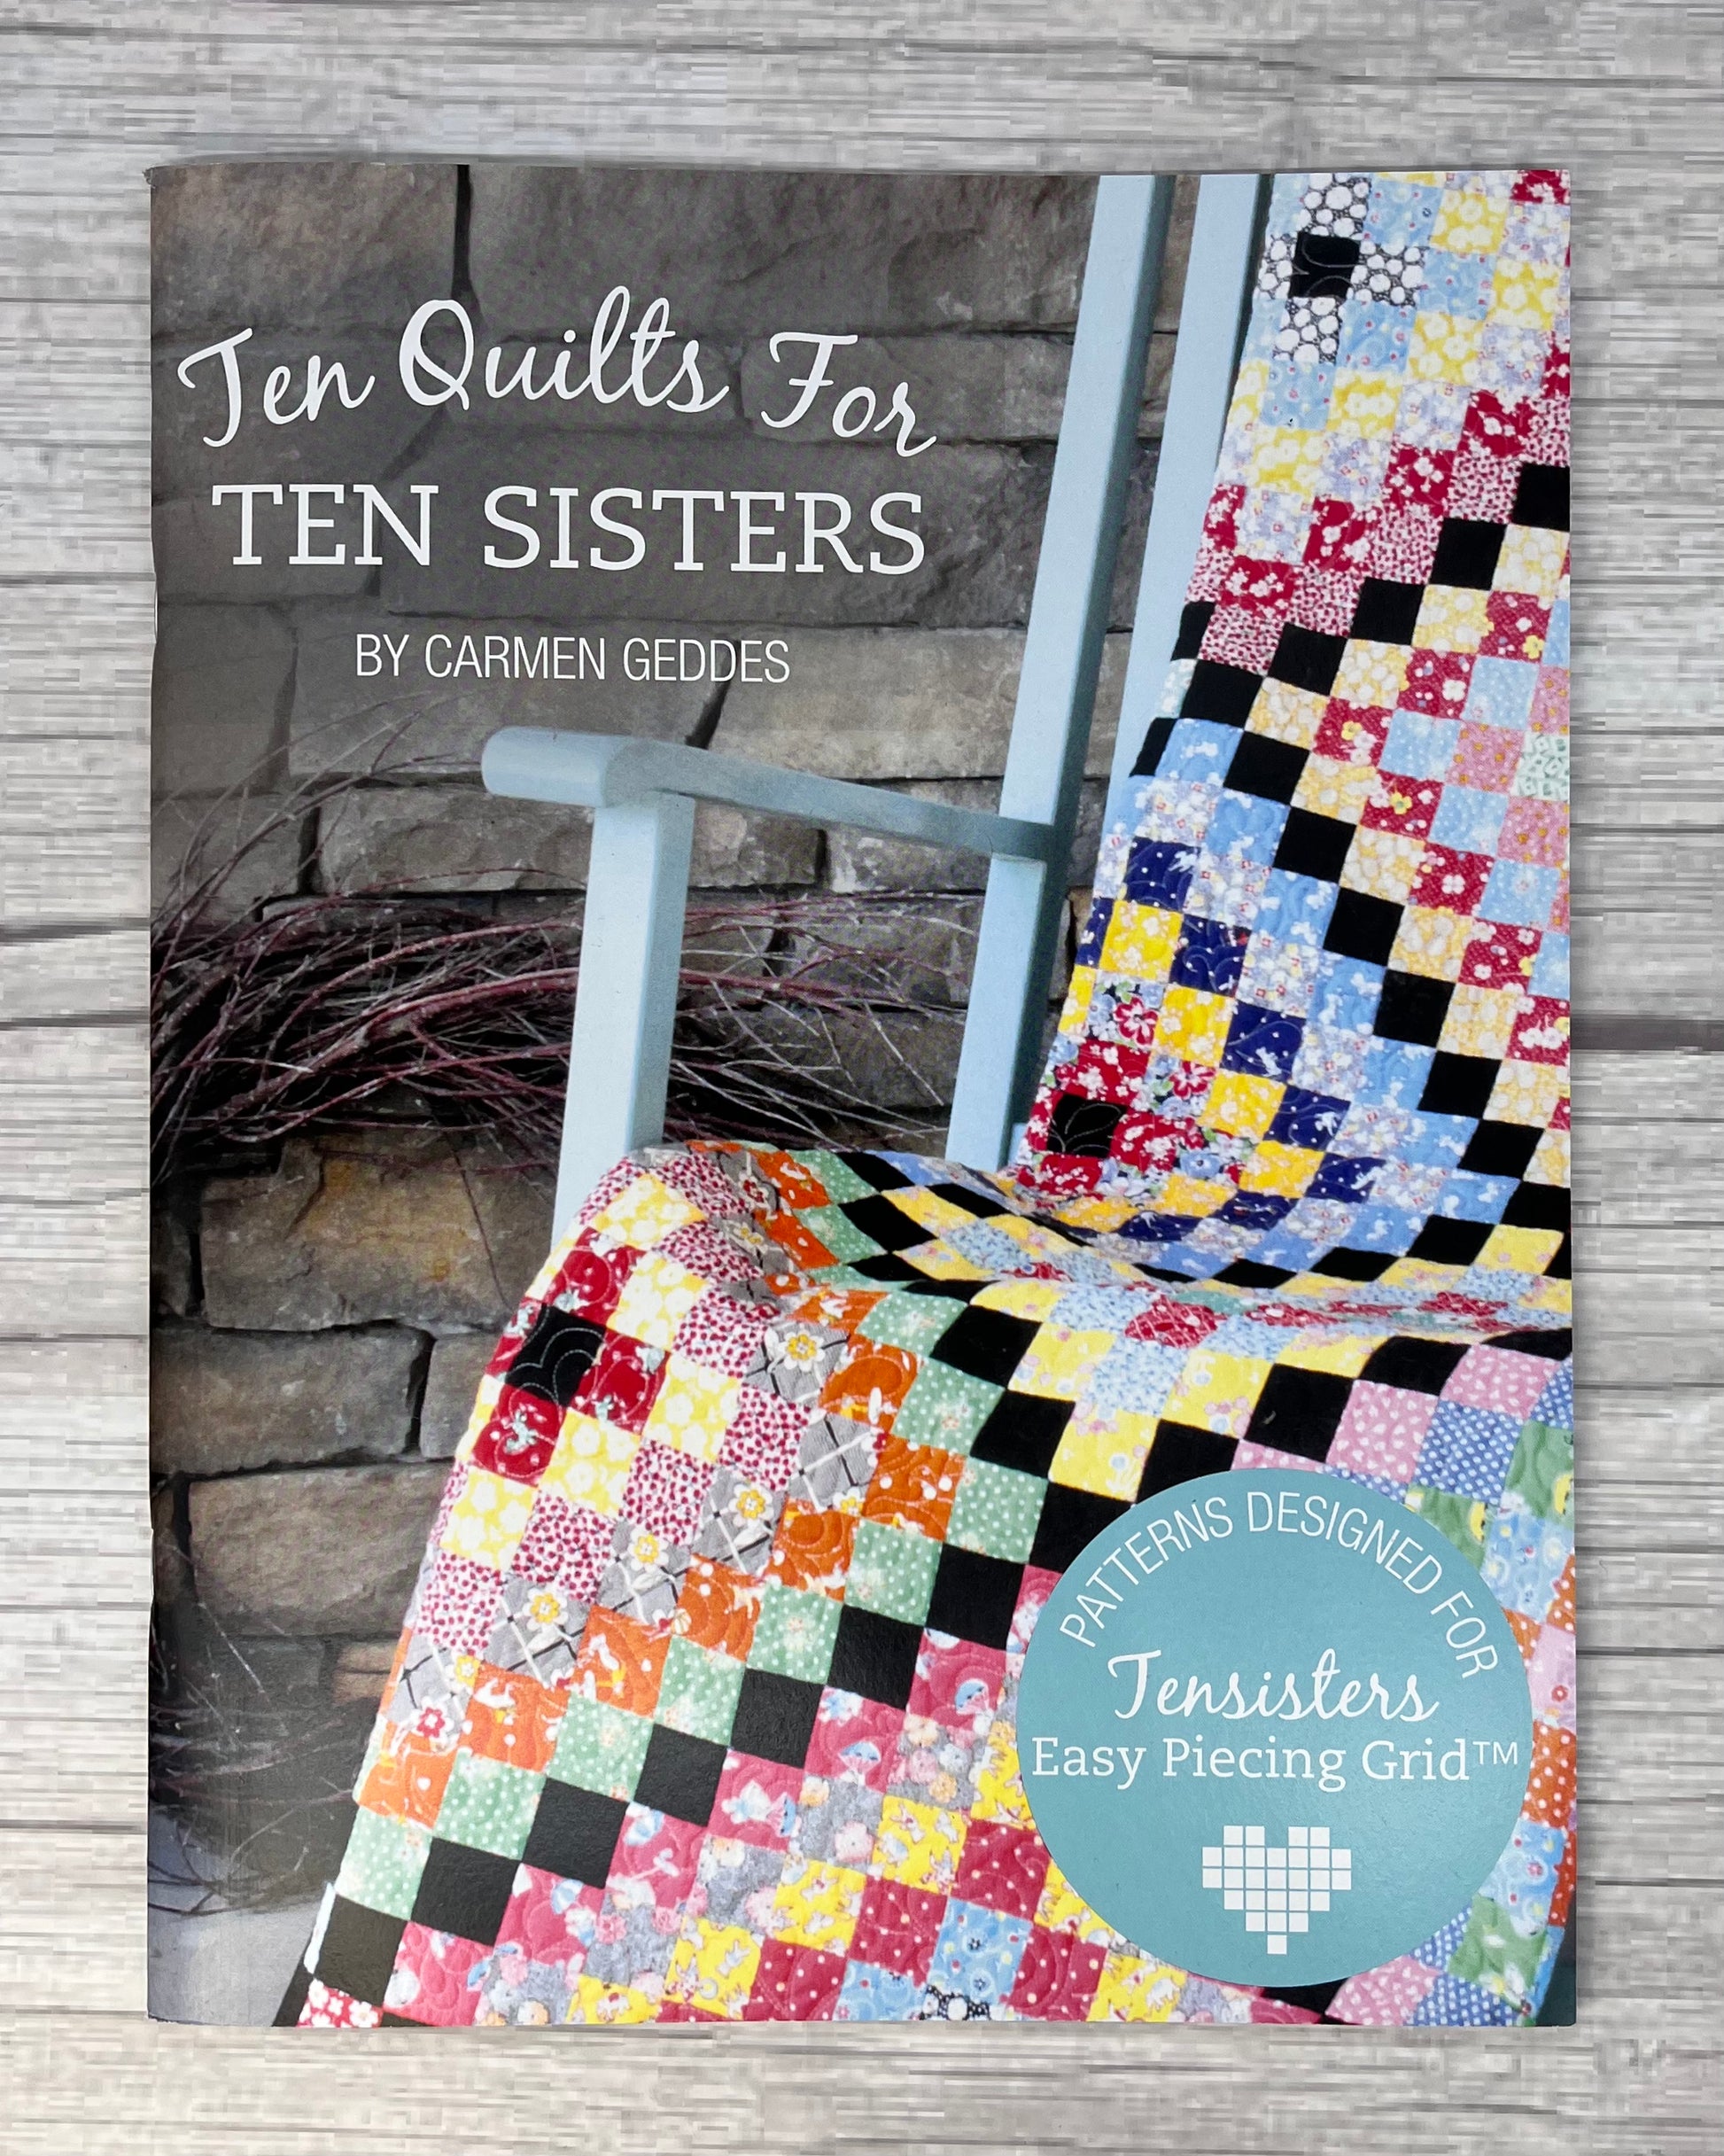 Ten Quilts for Ten Sisters Quilt Book from Carmen Geddes of Ten Sisters for Easy Piecing Grid System - Good Vibes Quilt Shop